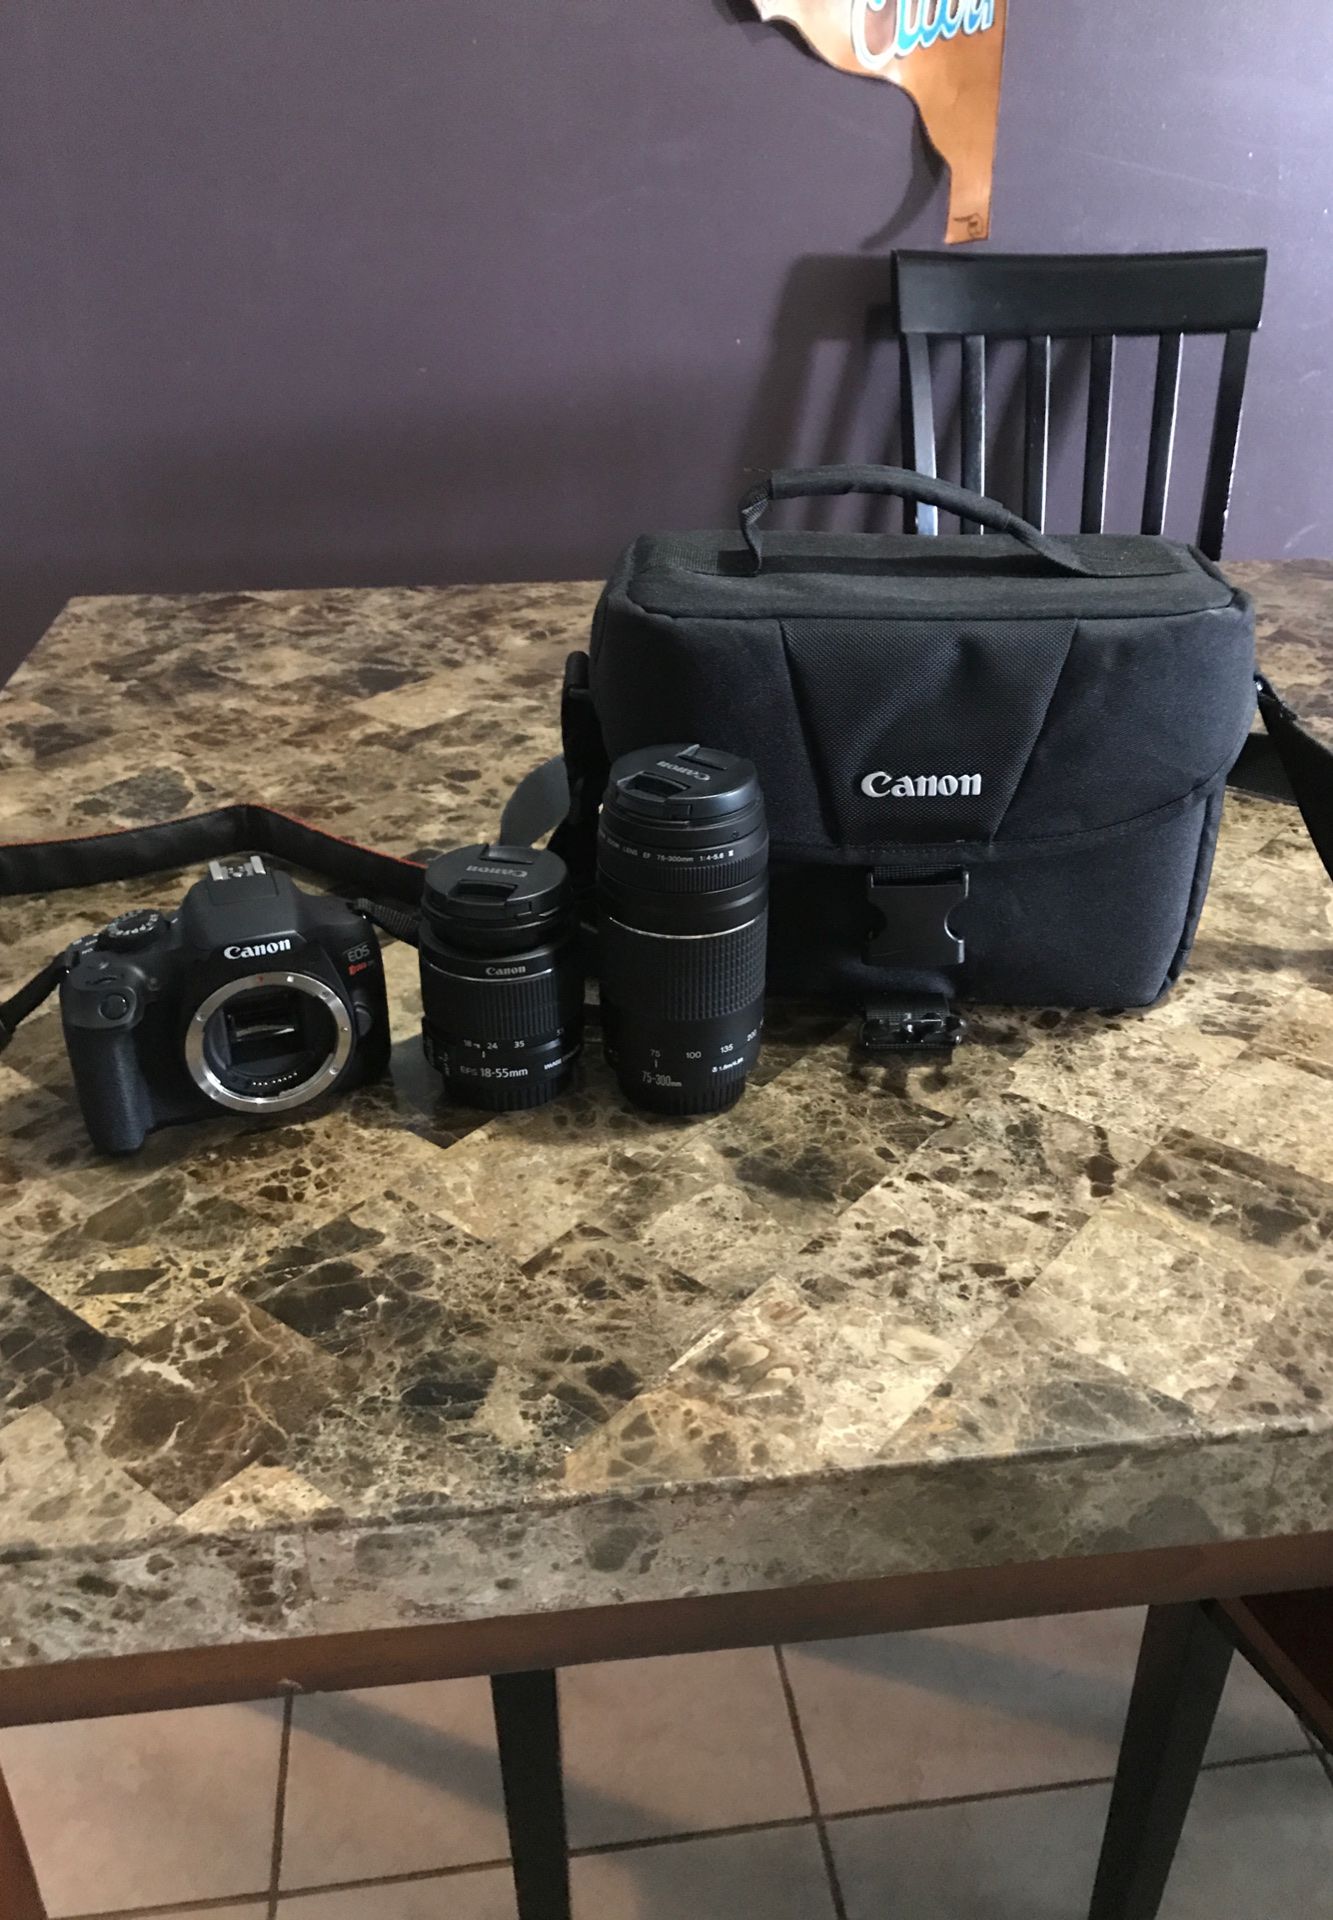 Canon Rebel T6, lenses, and carrying case